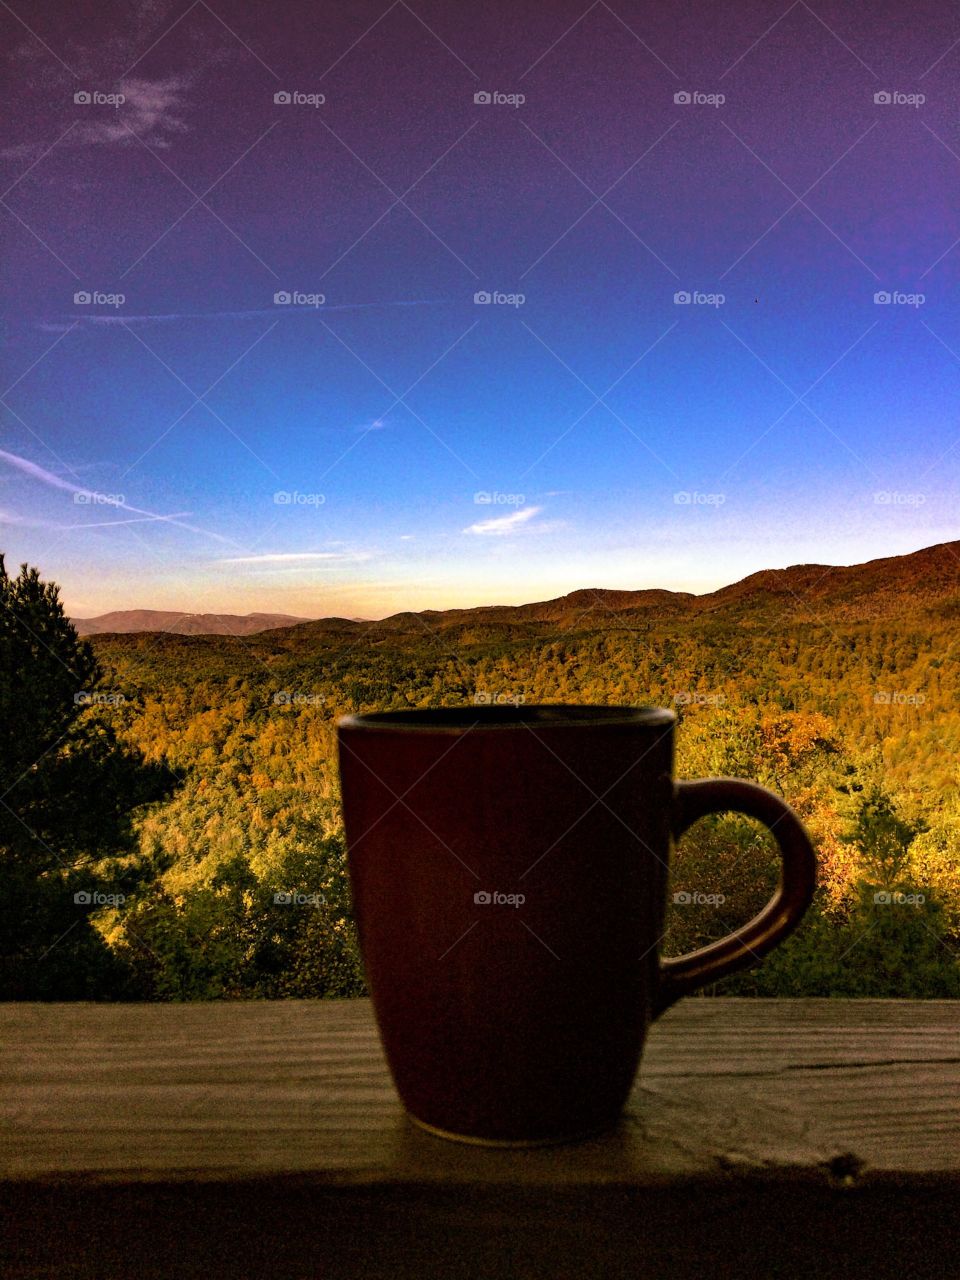 This has been one of my favorite photos ever. The mug with the fall mountain landscape in the distance it’s just perfection to me. 